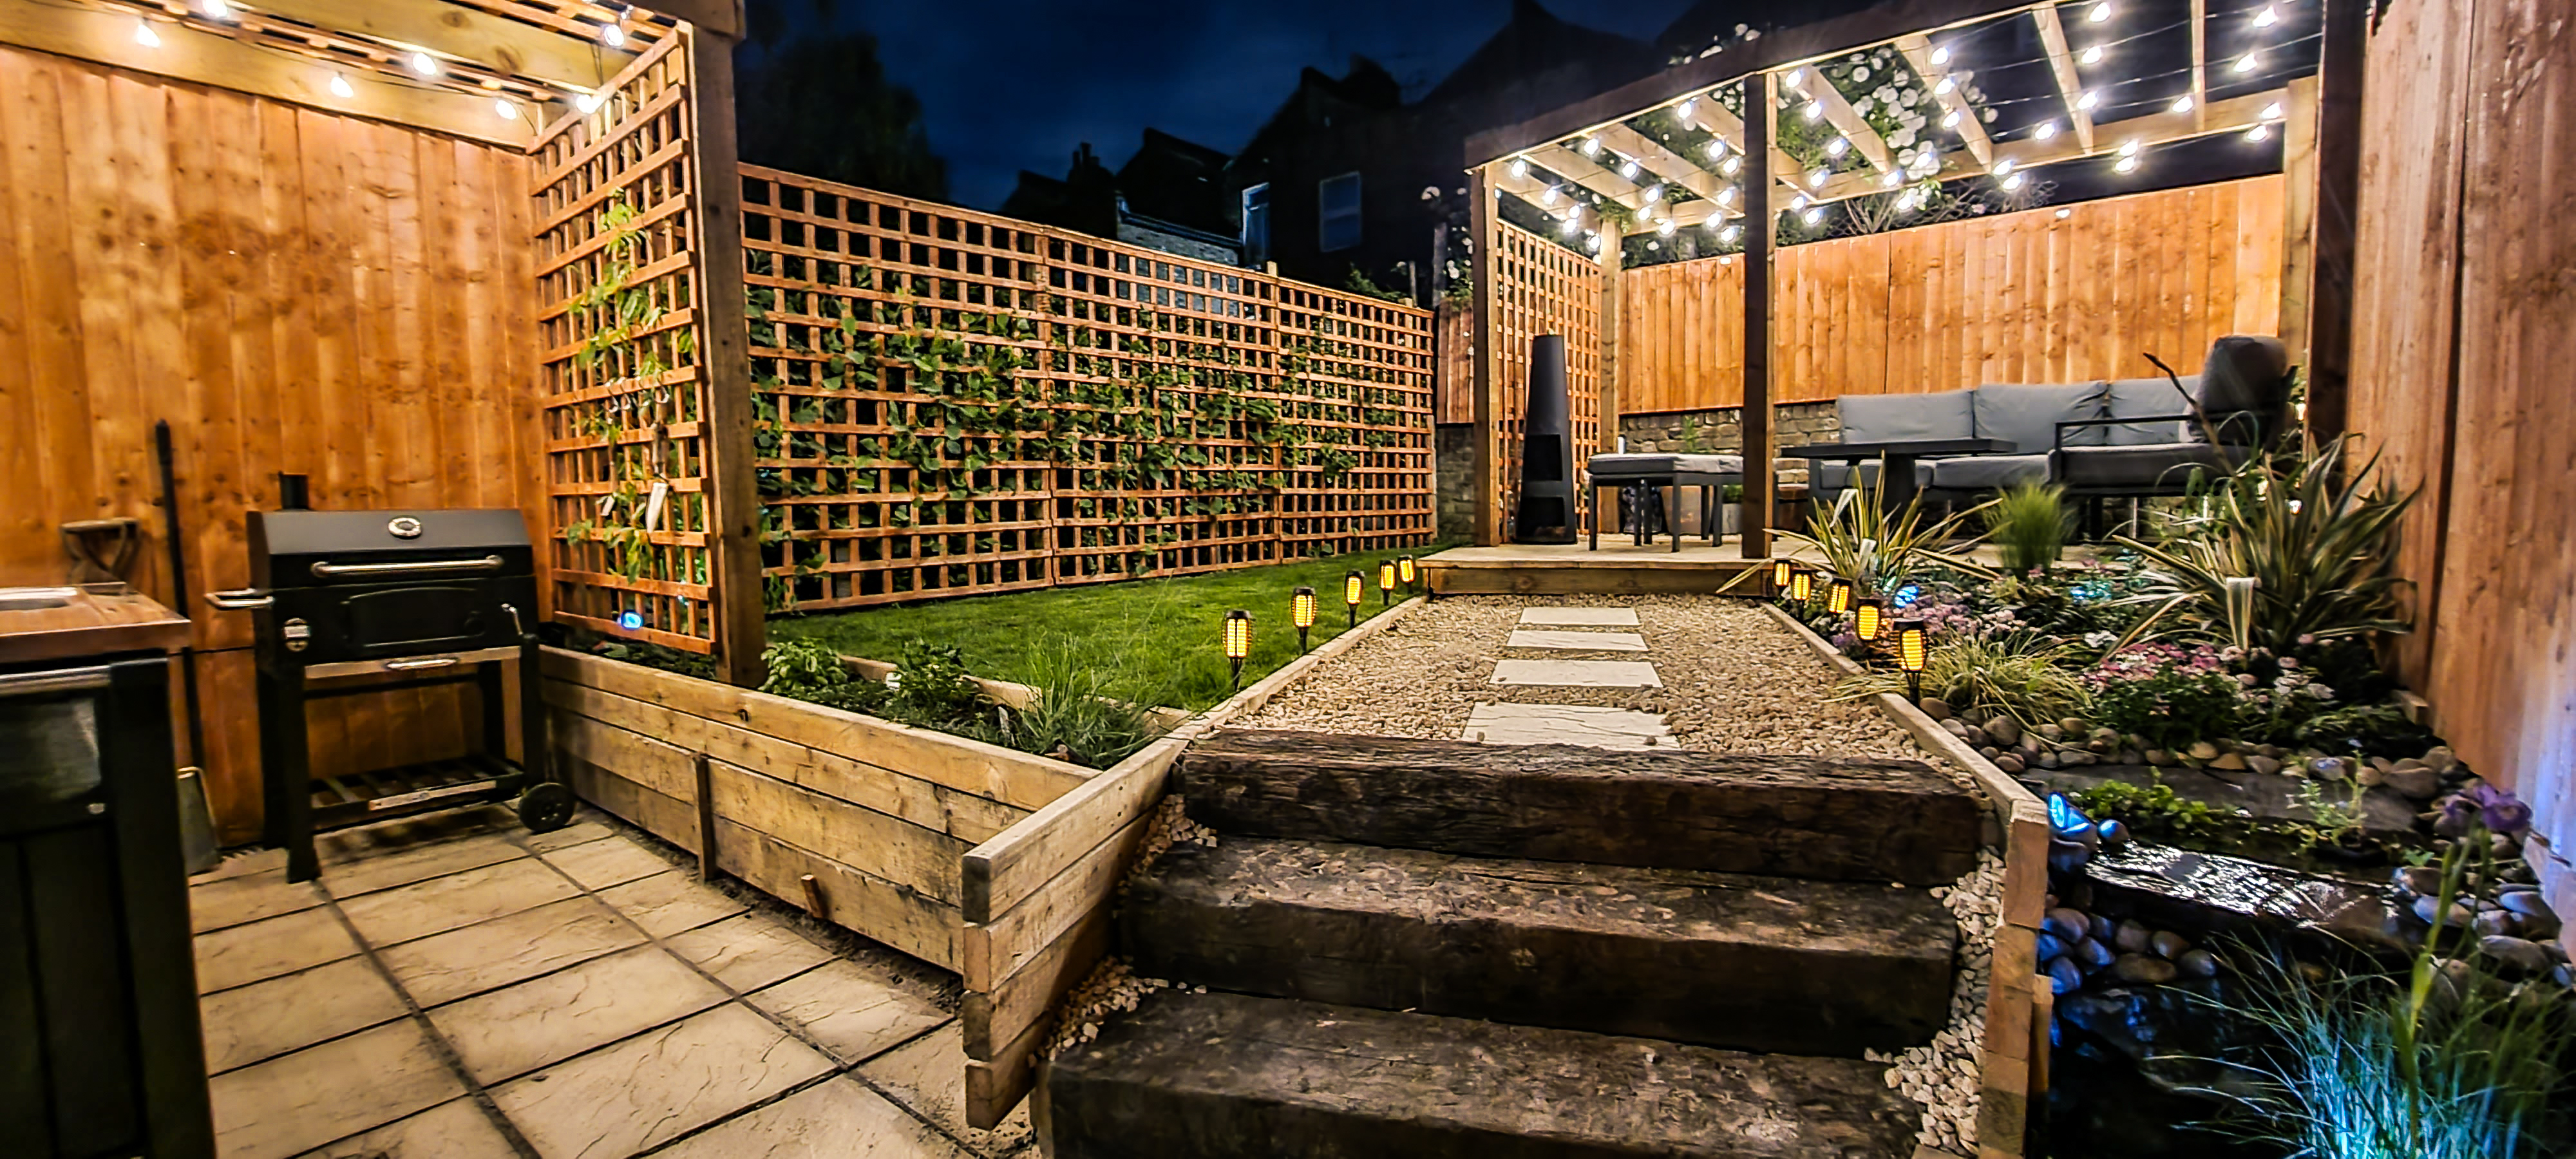 Landscaped Garden with Sitting Area, Outdoor Kitchen and Water Feature 